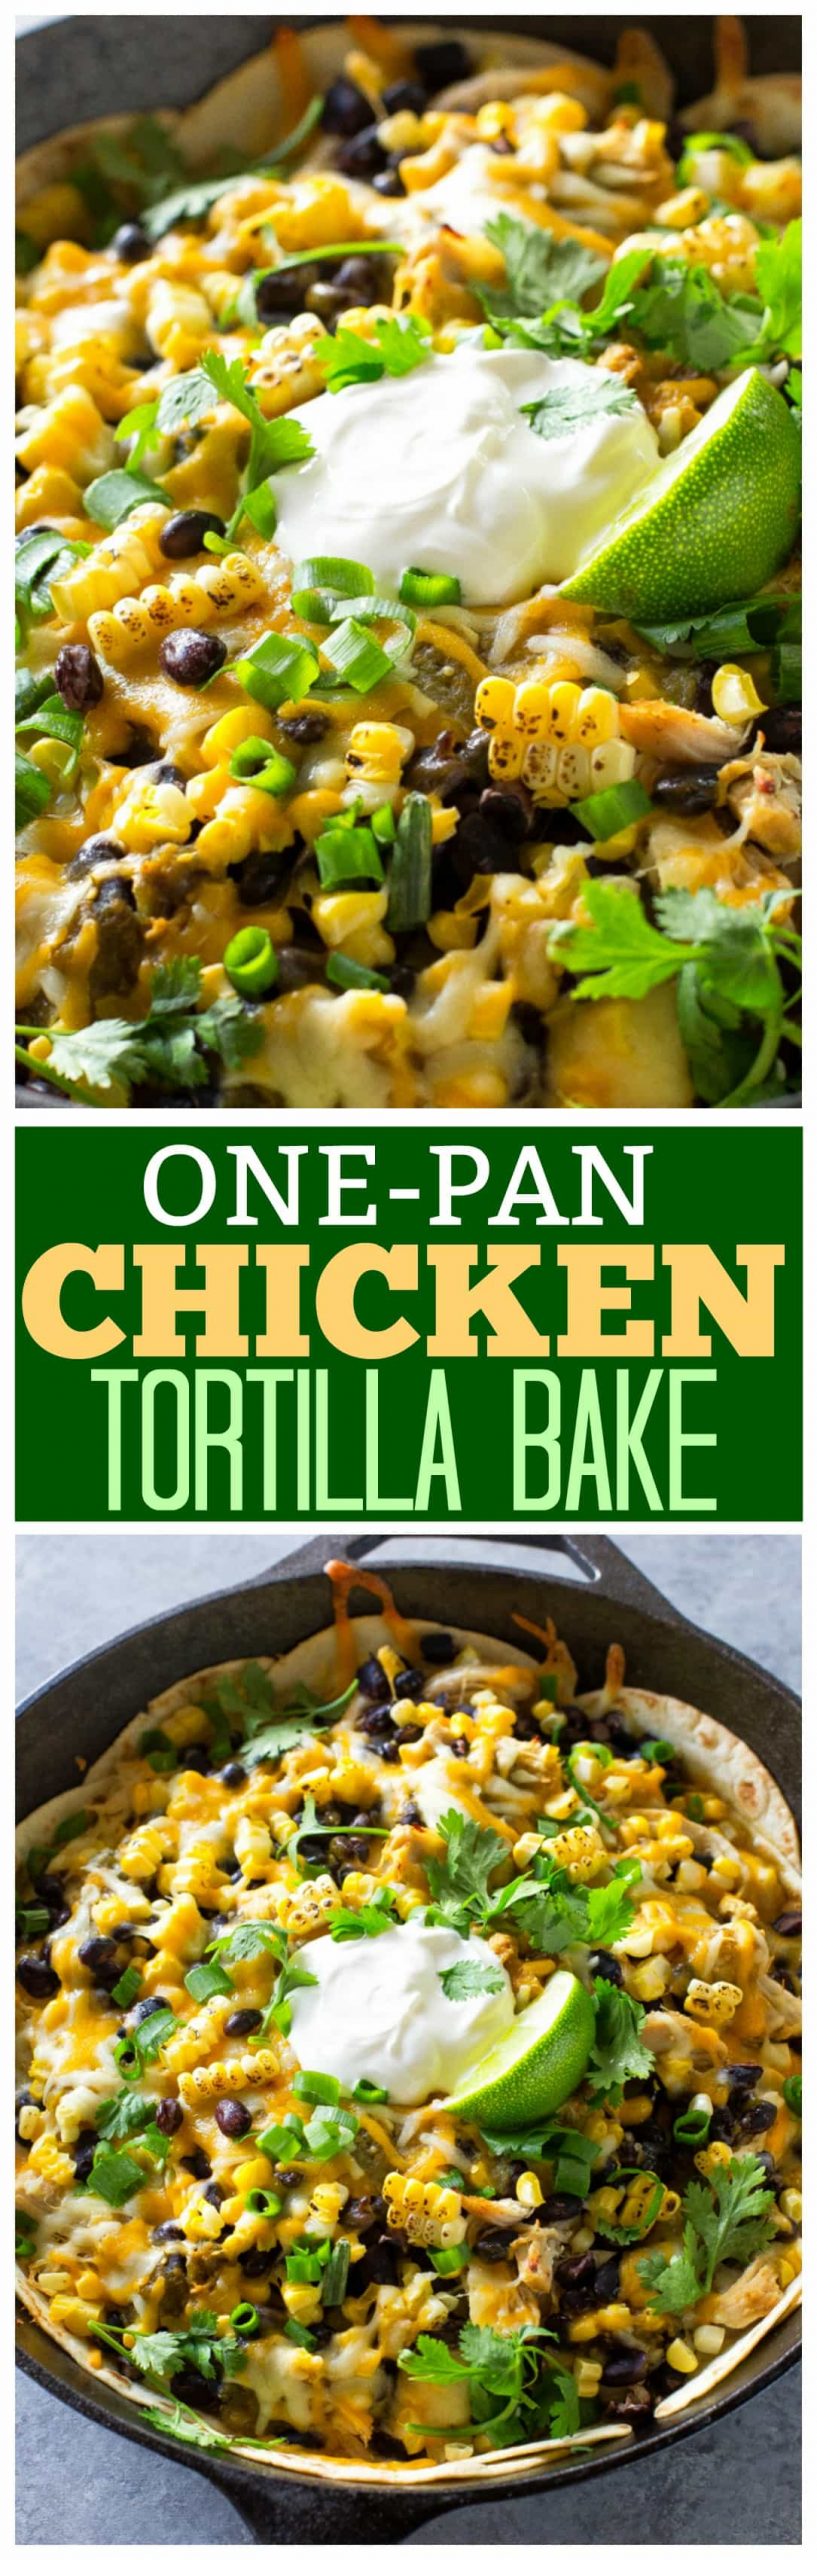 This One-Pan Chicken Tortilla Bake is a spicy Mexican dinner with only 7 ingredients. Layers of tortilla, chicken, black beans, and corn with lots of cheese in between.  #onepan #mexican #chicken #dinner #easy